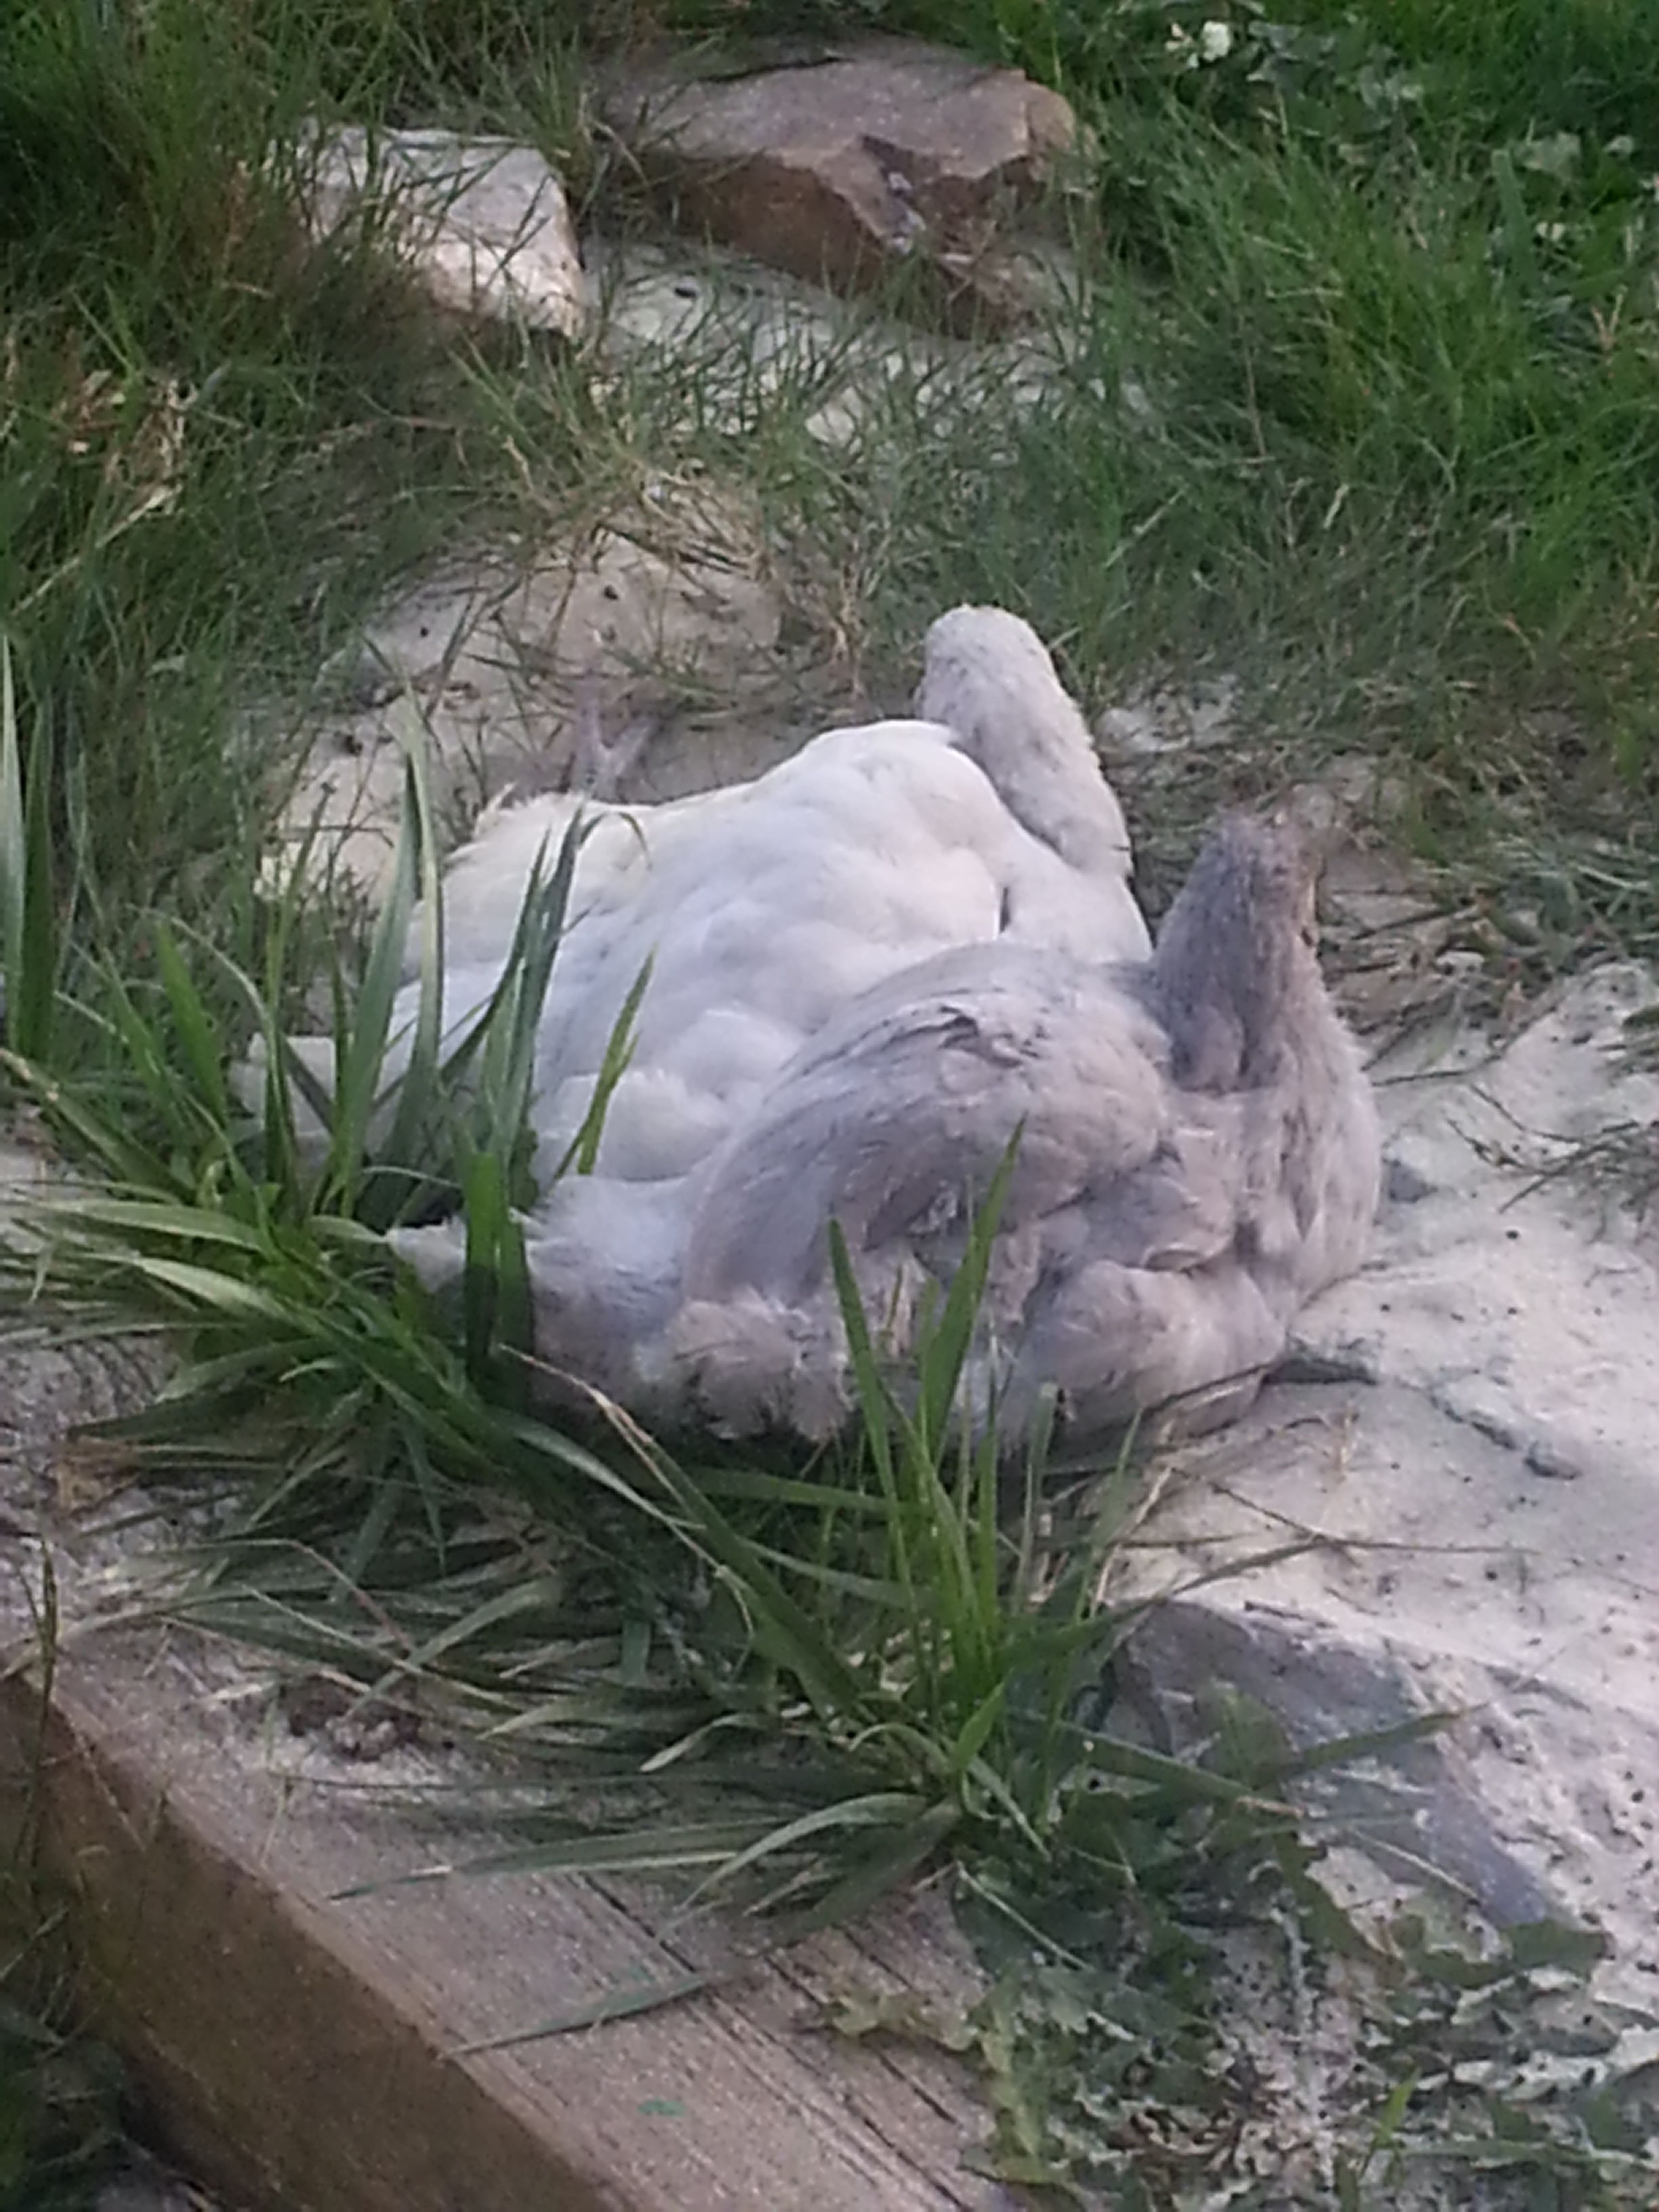 Dust and Sun bathing....aahhhh... the life of a chicken